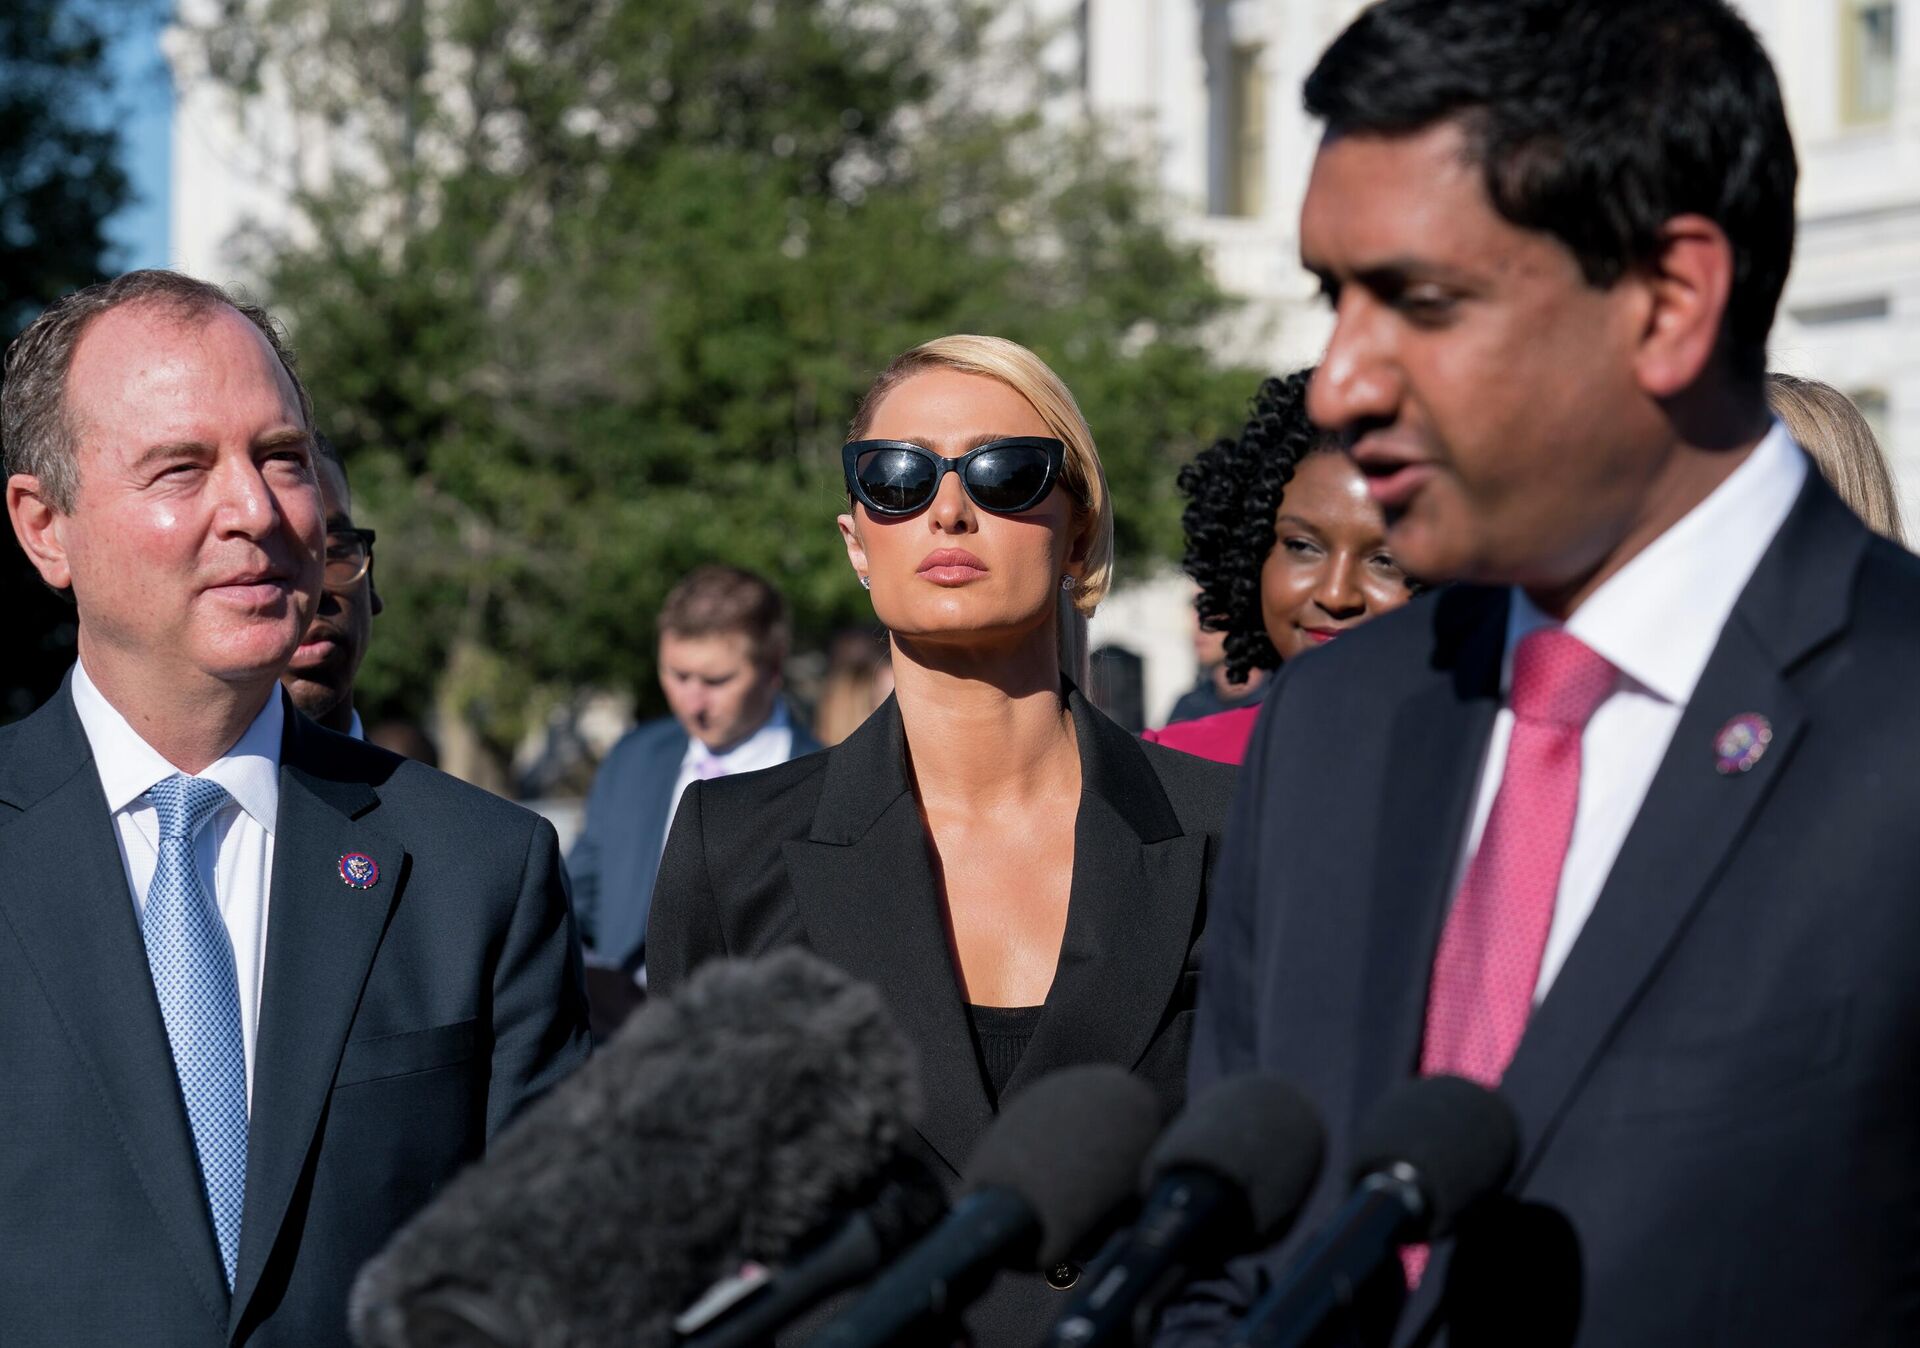 Hotel heiress and reality star Paris Hilton, flanked by House Intelligence Committee Chairman Adam Schiff, D-Calif., left, and Rep. Ro Khanna, D-Calif., lends her celebrity to support legislation to establish a bill of rights for children placed in congregate care facilities, at the Capitol on Wednesday, Oct. 20, 2021. Hilton says she was traumatized as a teenager when she was sent by her family to abusive care facilities. - Sputnik International, 1920, 10.05.2022